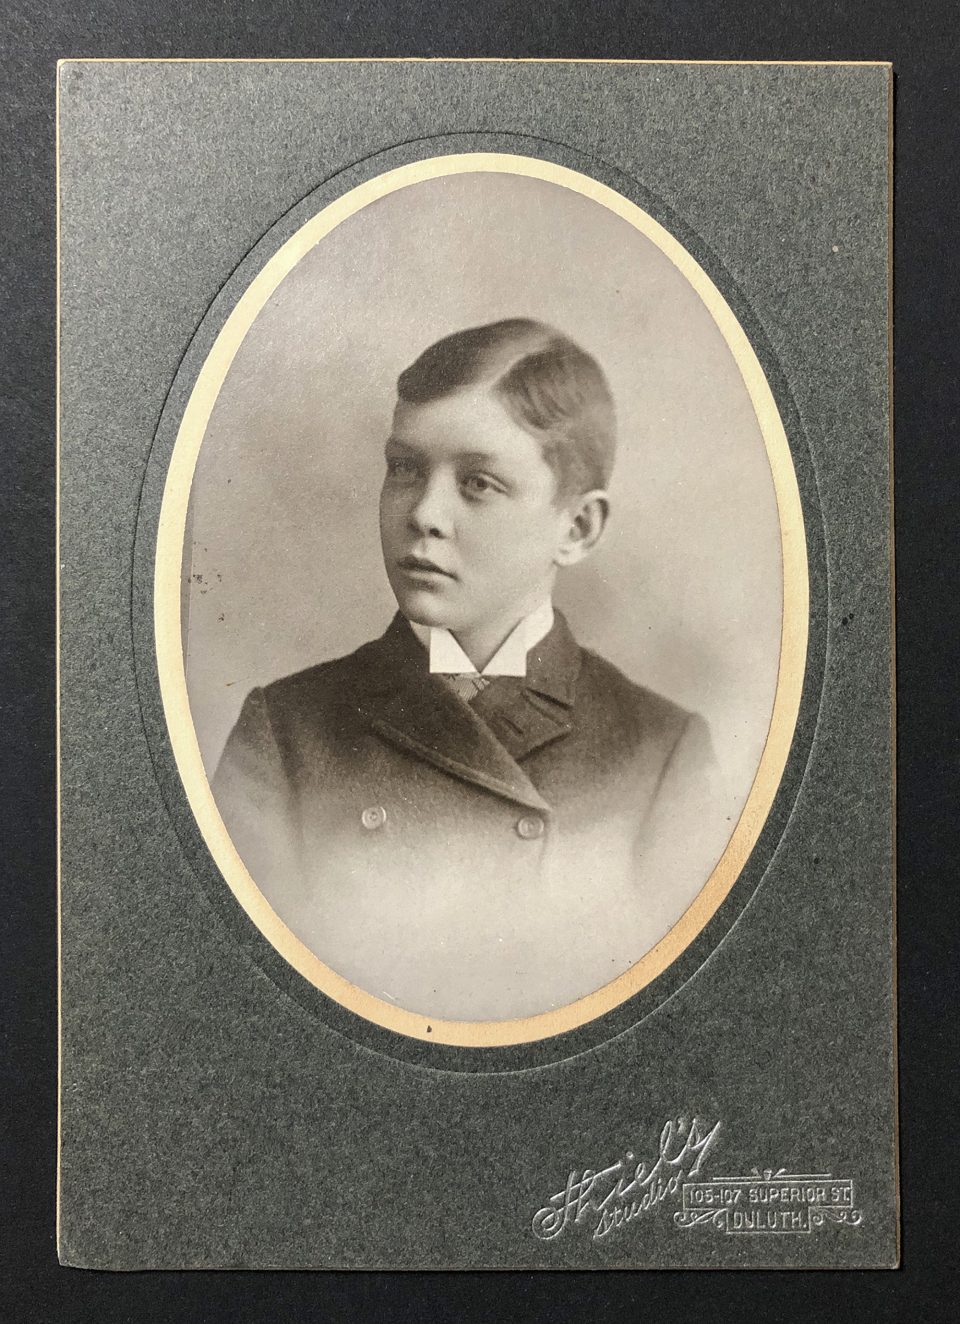 A head and shoulders portrait of a boy in a buttoned-up overcoat with an oval window mat by Theil's Studio branding. The studio address was 105-107 Superior Street in Duluth.